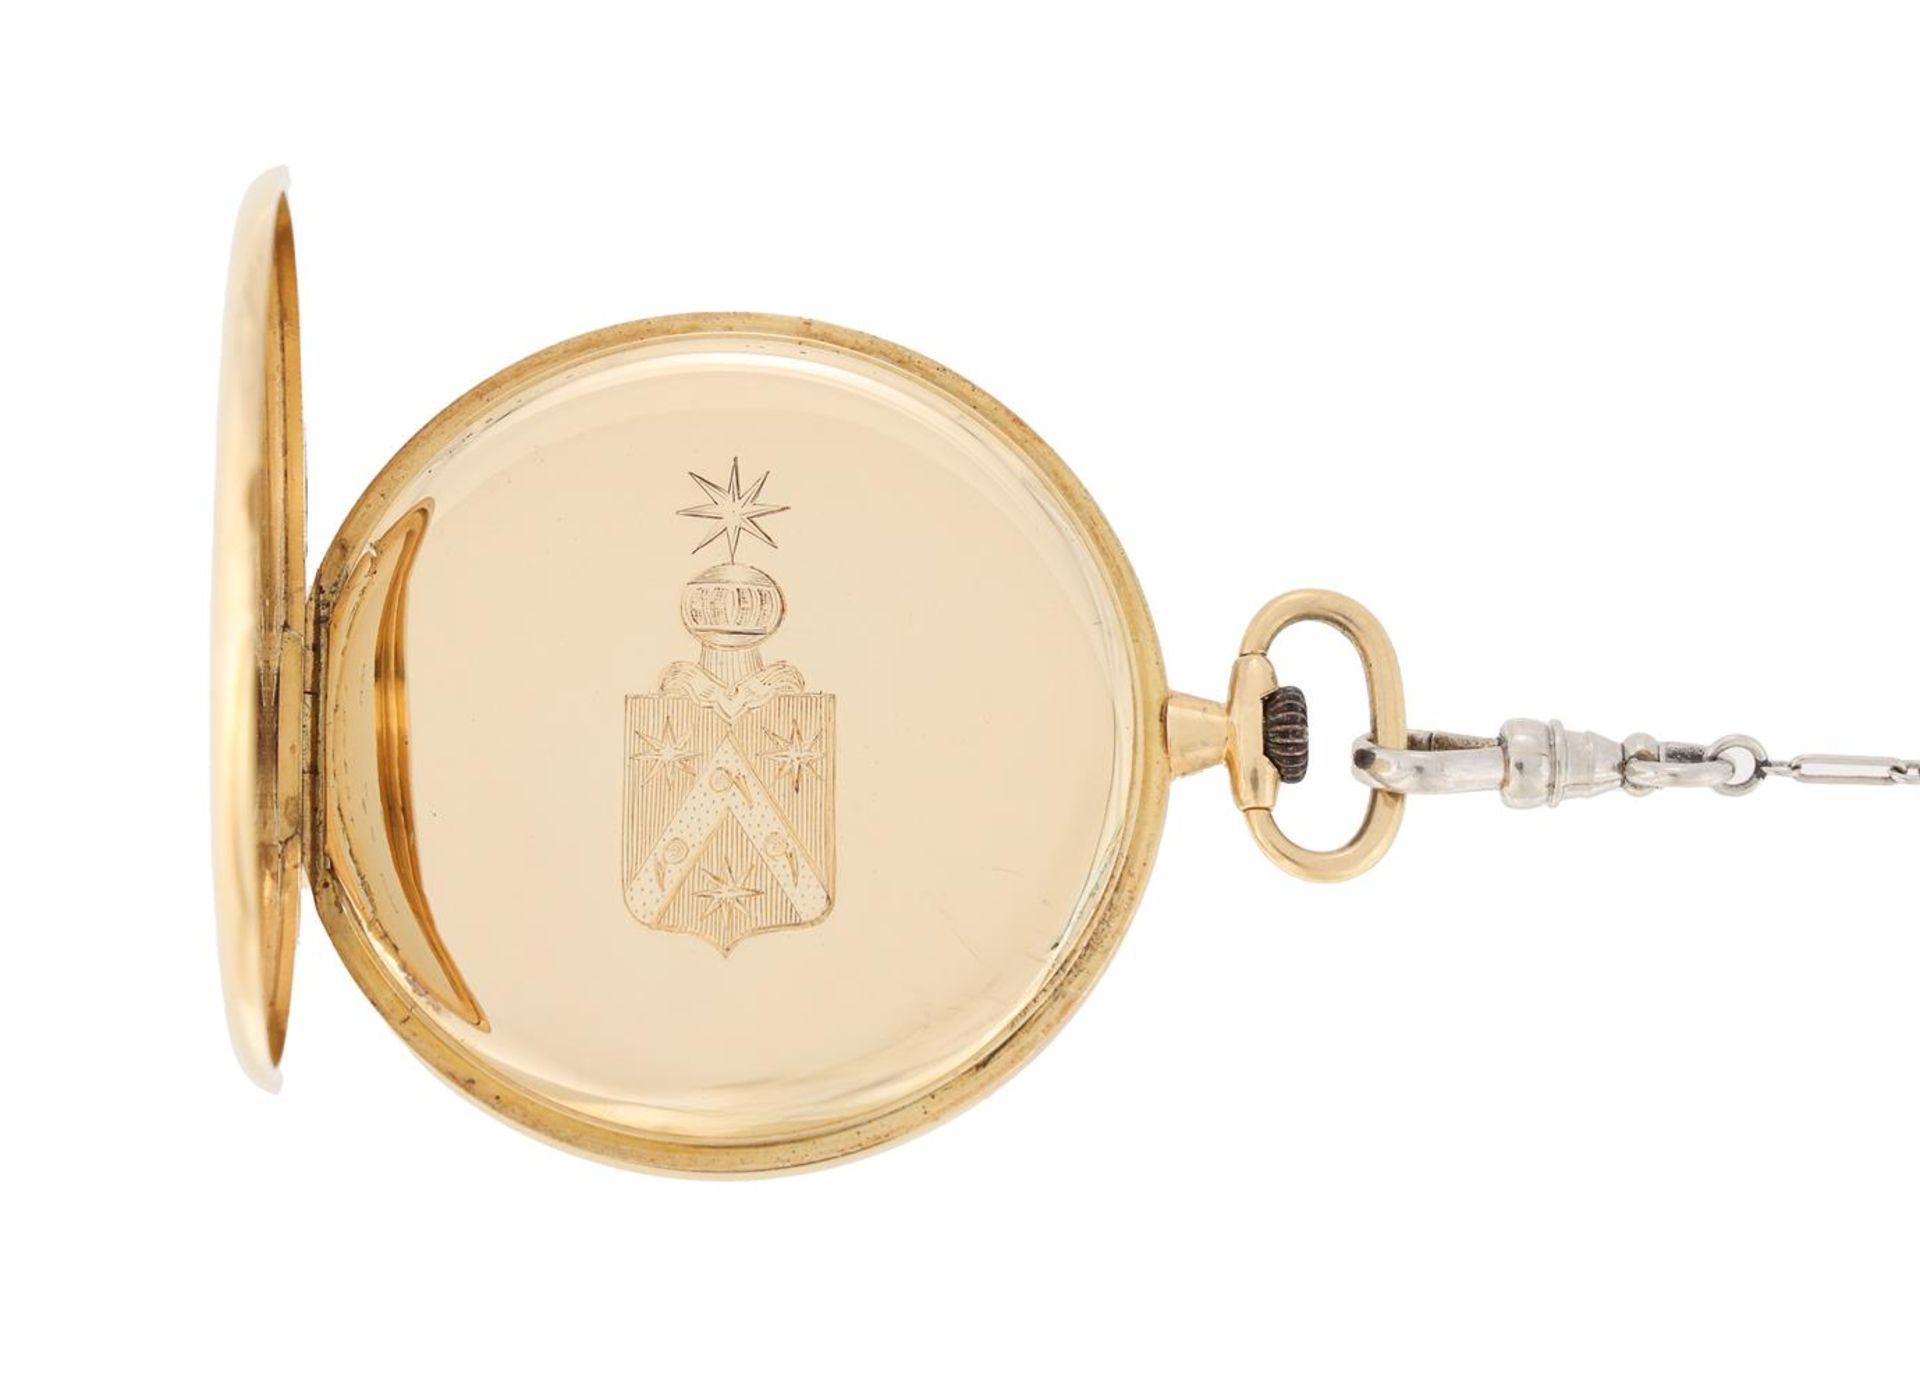 UNSIGNED, A SWISS 18 CARAT GOLD KEYLESS WIND OPEN FACE POCKET WATCH - Image 2 of 4